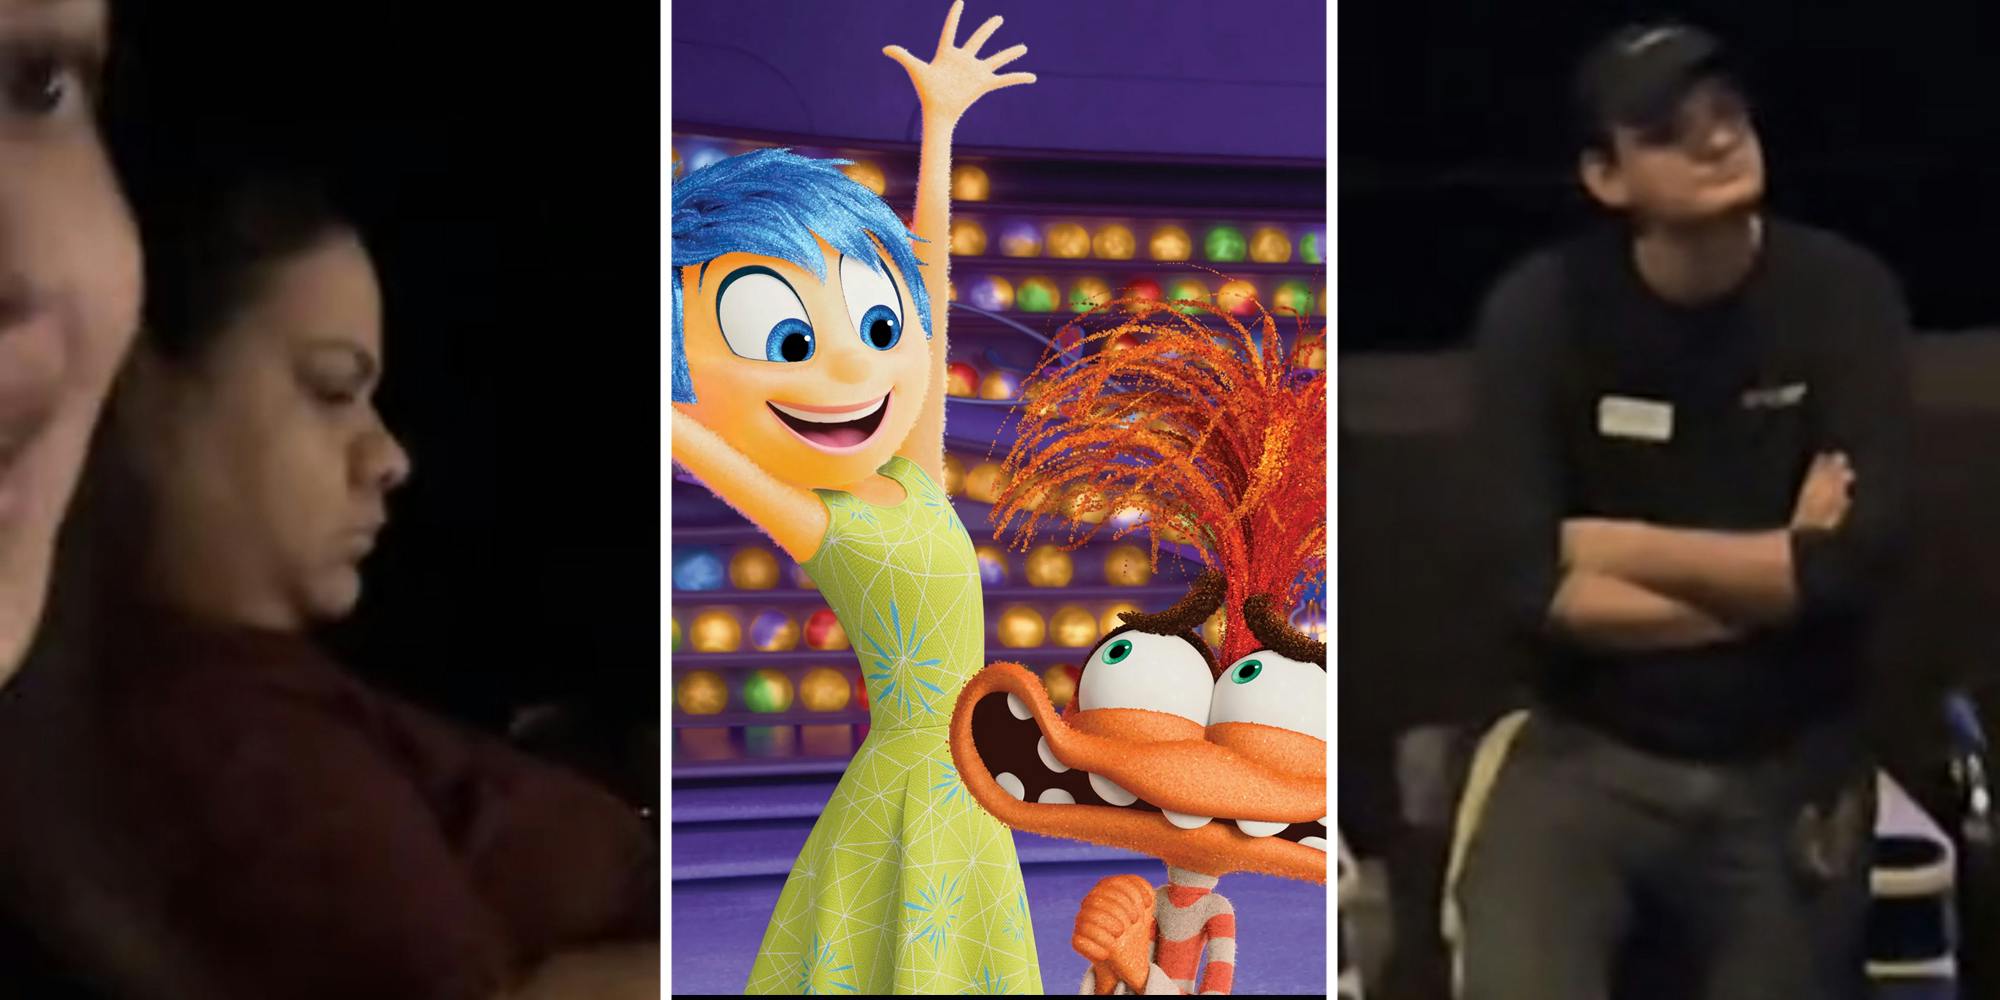 Waiting in movie(l+r), Inside out 2(c)